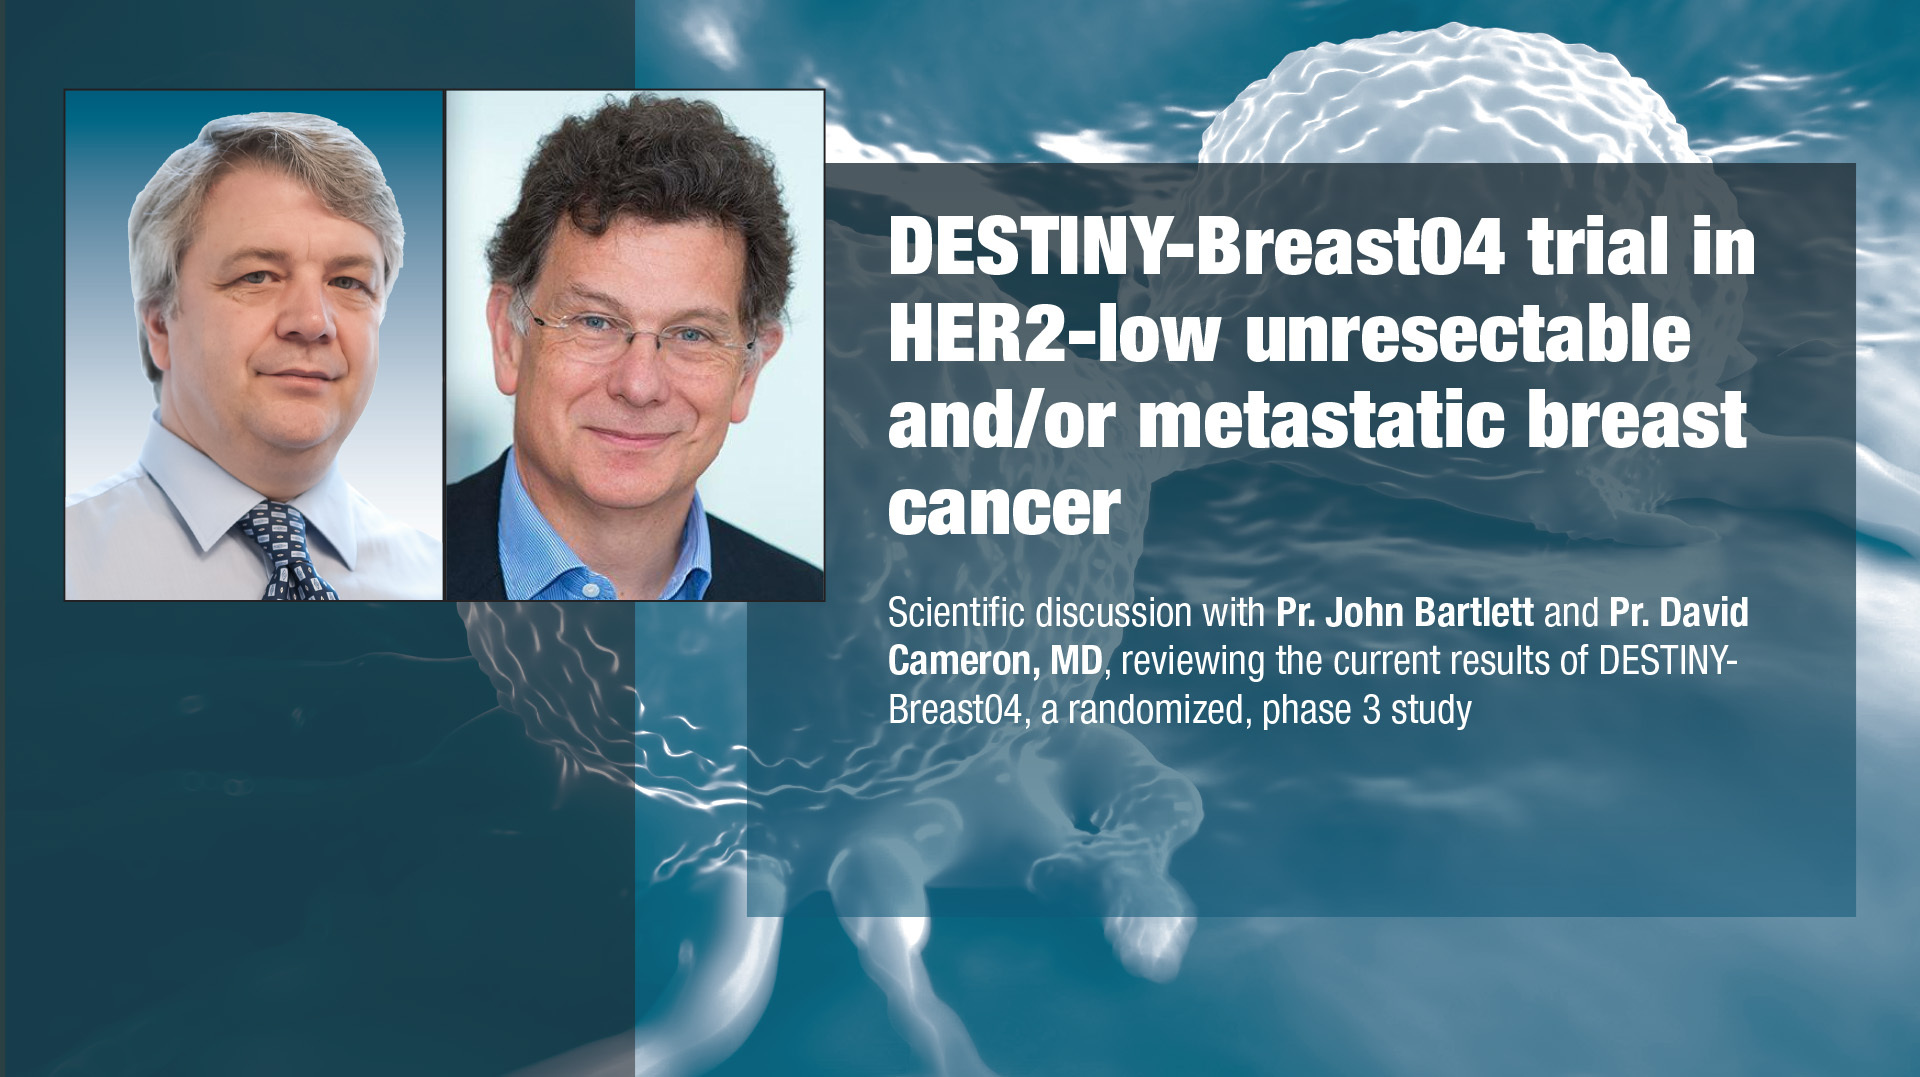 ASCO 2022 - DESTINY-Breast04 trial in HER2-low unresectable and/or metastatic breast cancer